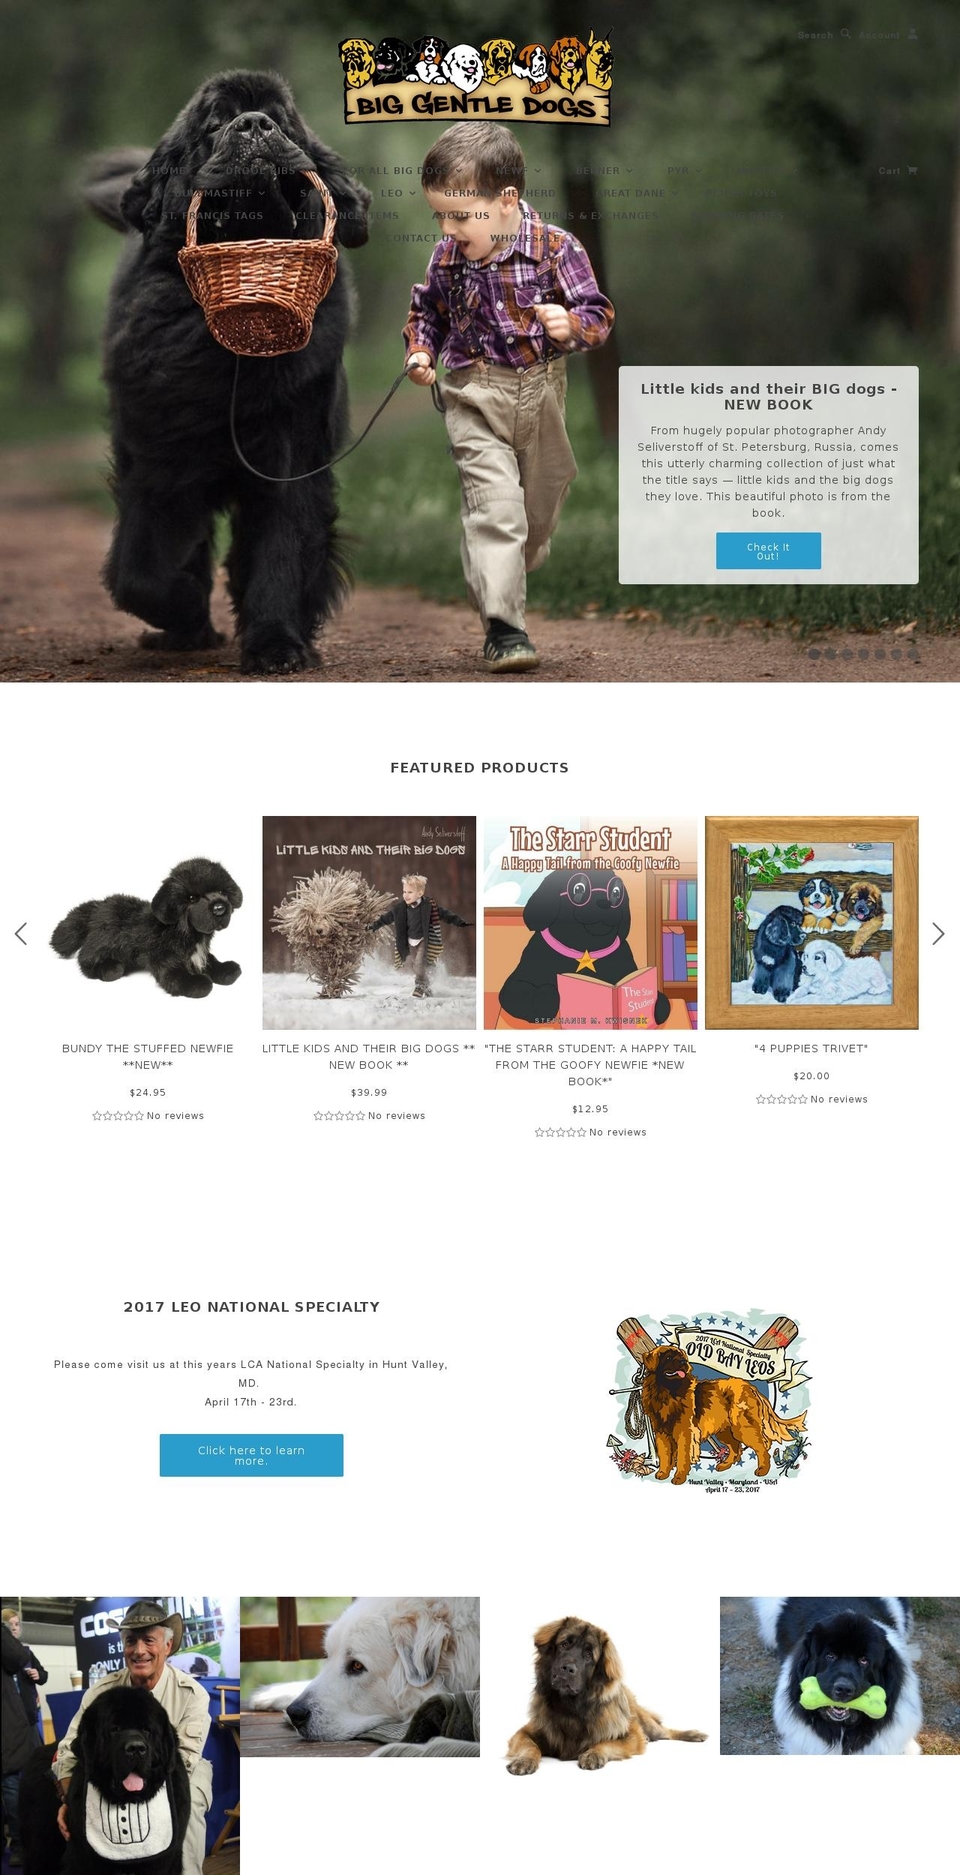 Upscale Shopify theme site example biggentledogs.com